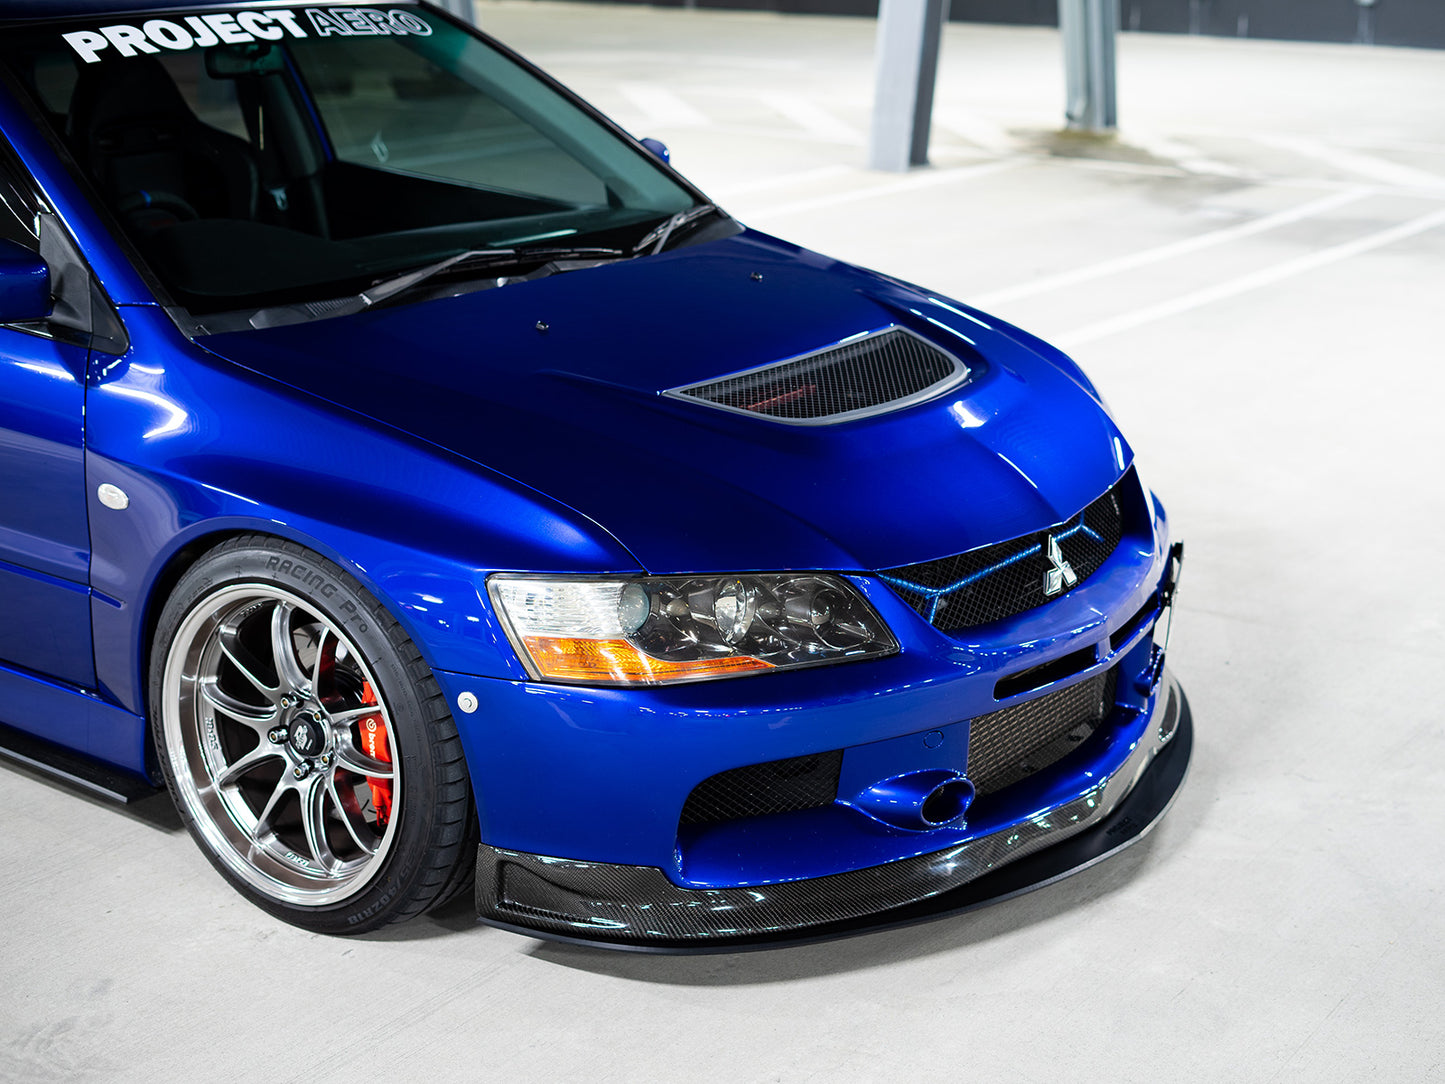 The Project Aero Evo 9 front splitter lip is the perfect lip for any Evo 9, complimenting the front bumper, this is a perfect piece for any Evo 9